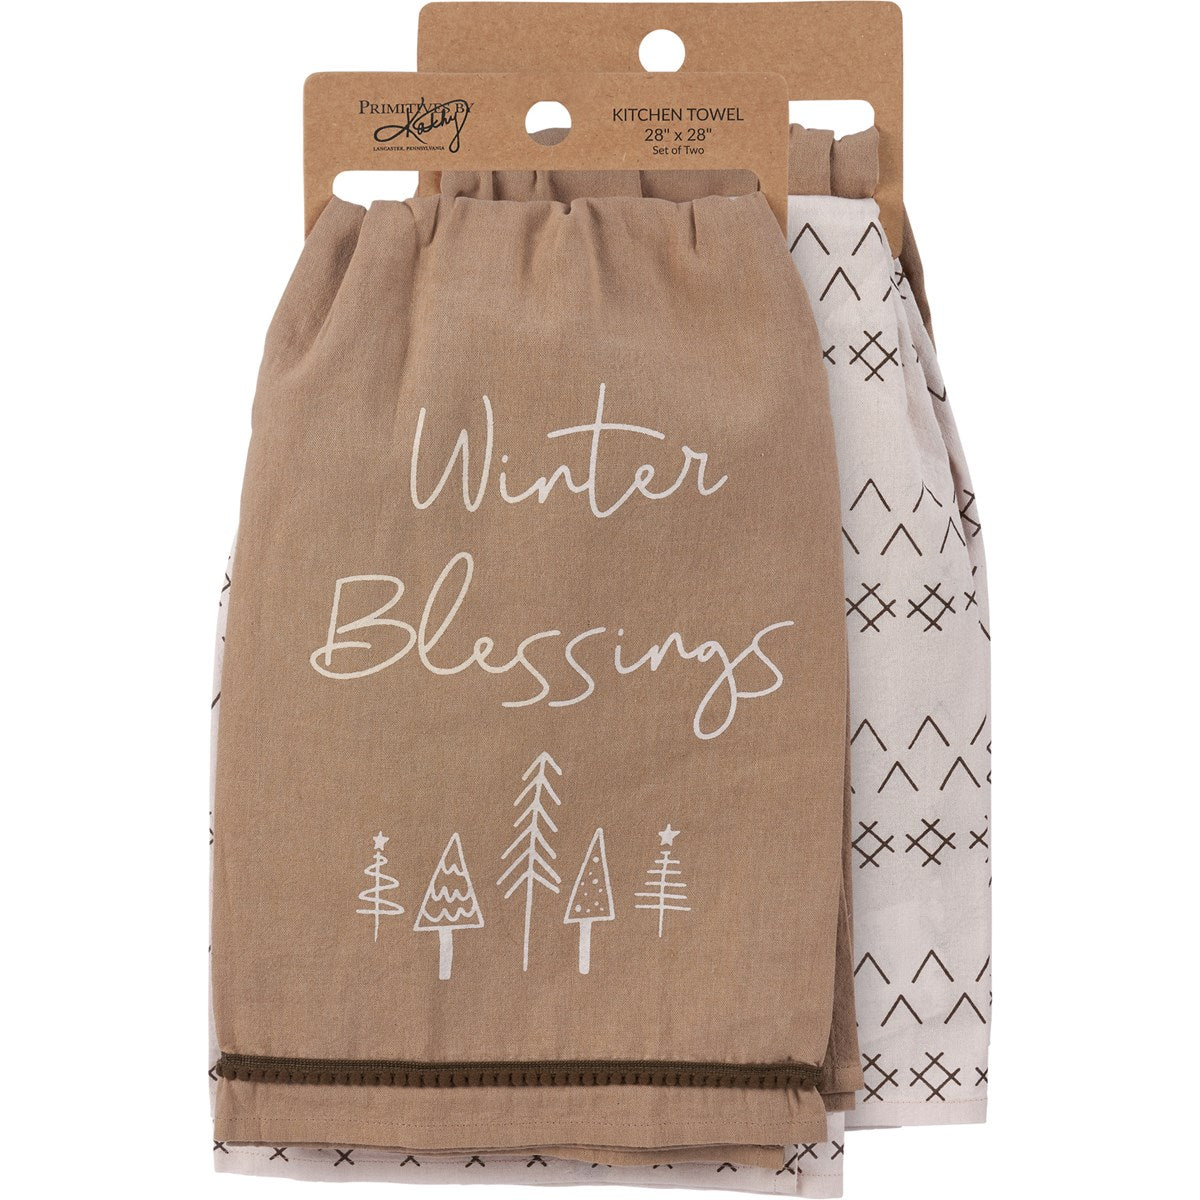 Winter Blessings Kitchen Towel